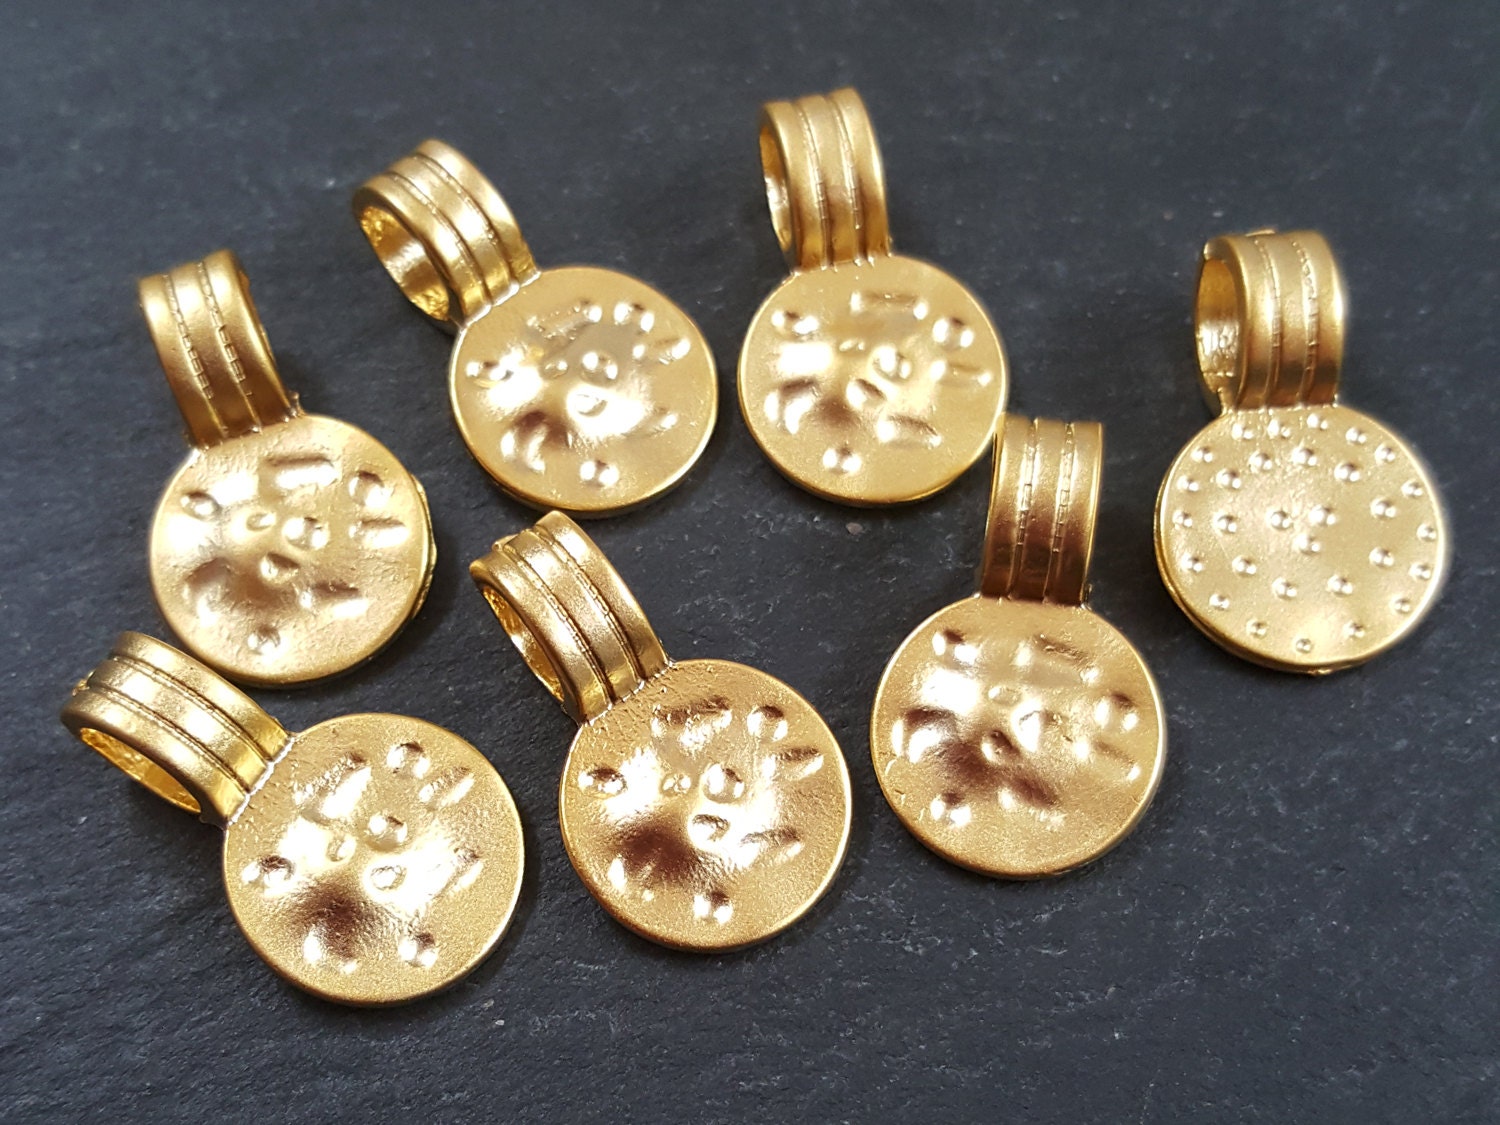 Hammered Dimple Disc Charms Ethnic Tribal Round 22k Matte Gold Plated Non Tarnish Turkish Jewelry Making Supplies Findings Components - 8pc